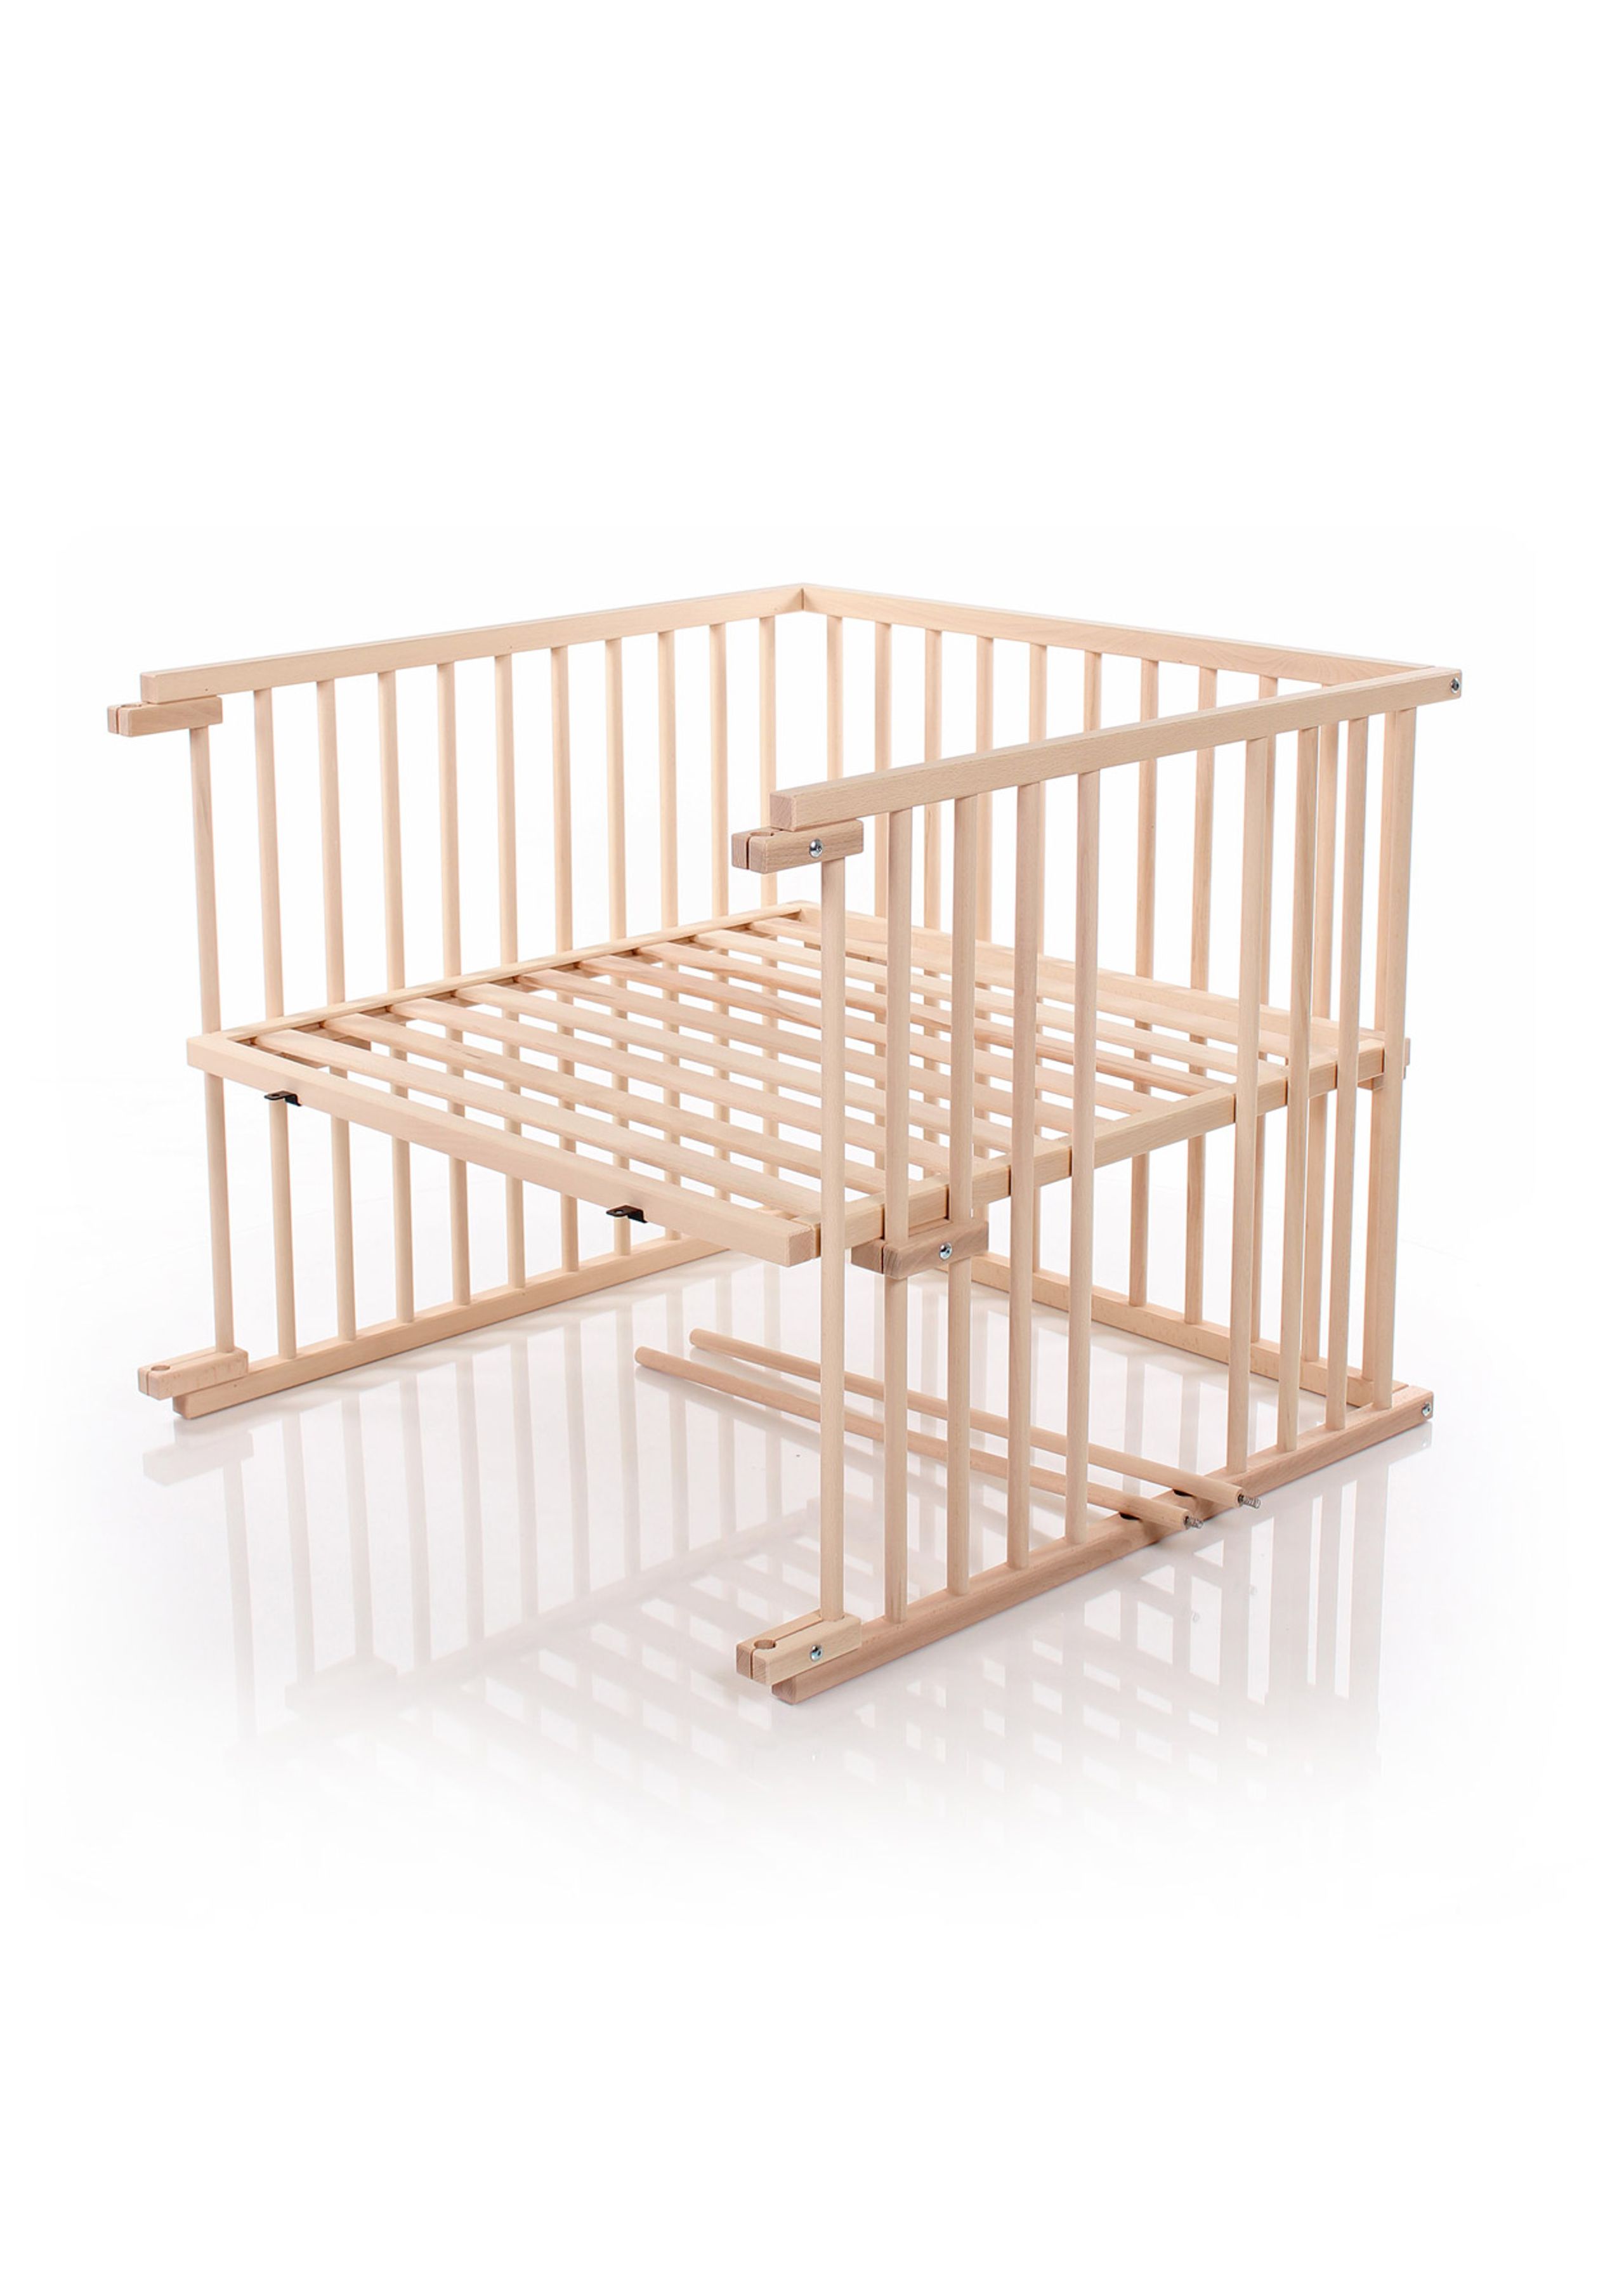 Babybay - Wieg - babybay Cot Conversion Kit suitable for model Maxi and Boxspring - Untreated